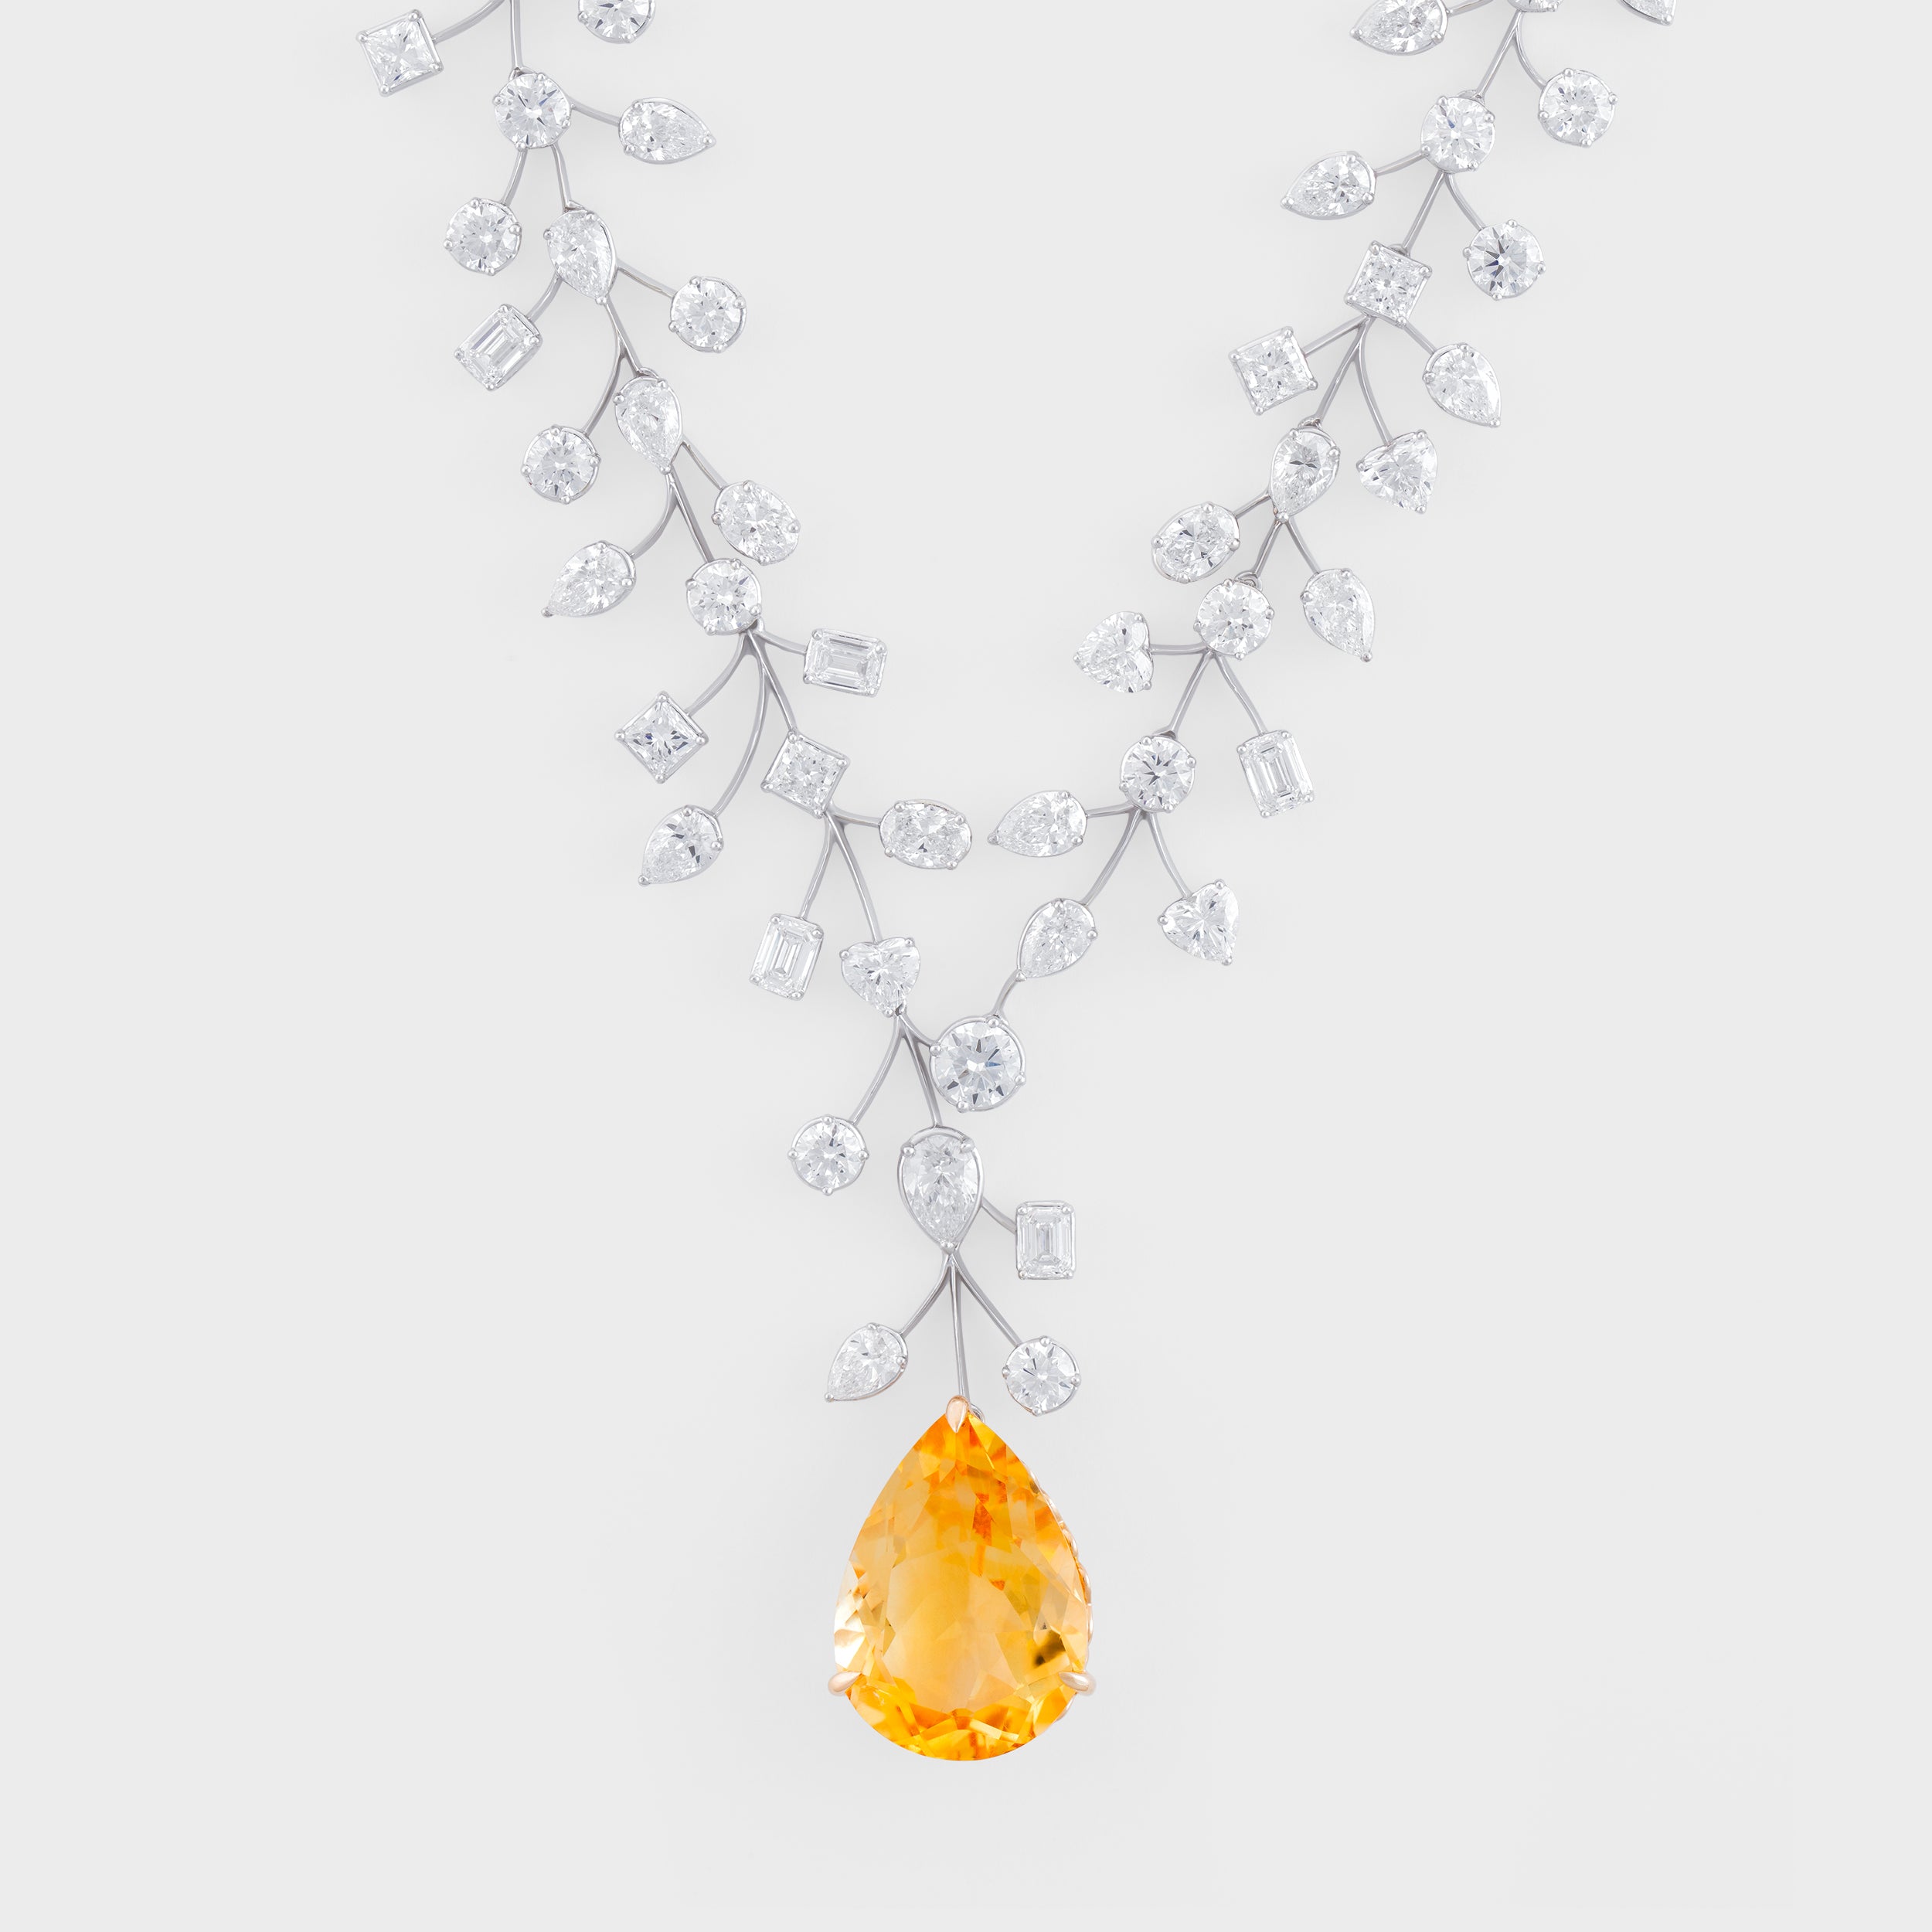 Radiant Fusion: Multi-Cut Lab Grown Diamond Necklace in White Gold | SKU : 0019475578